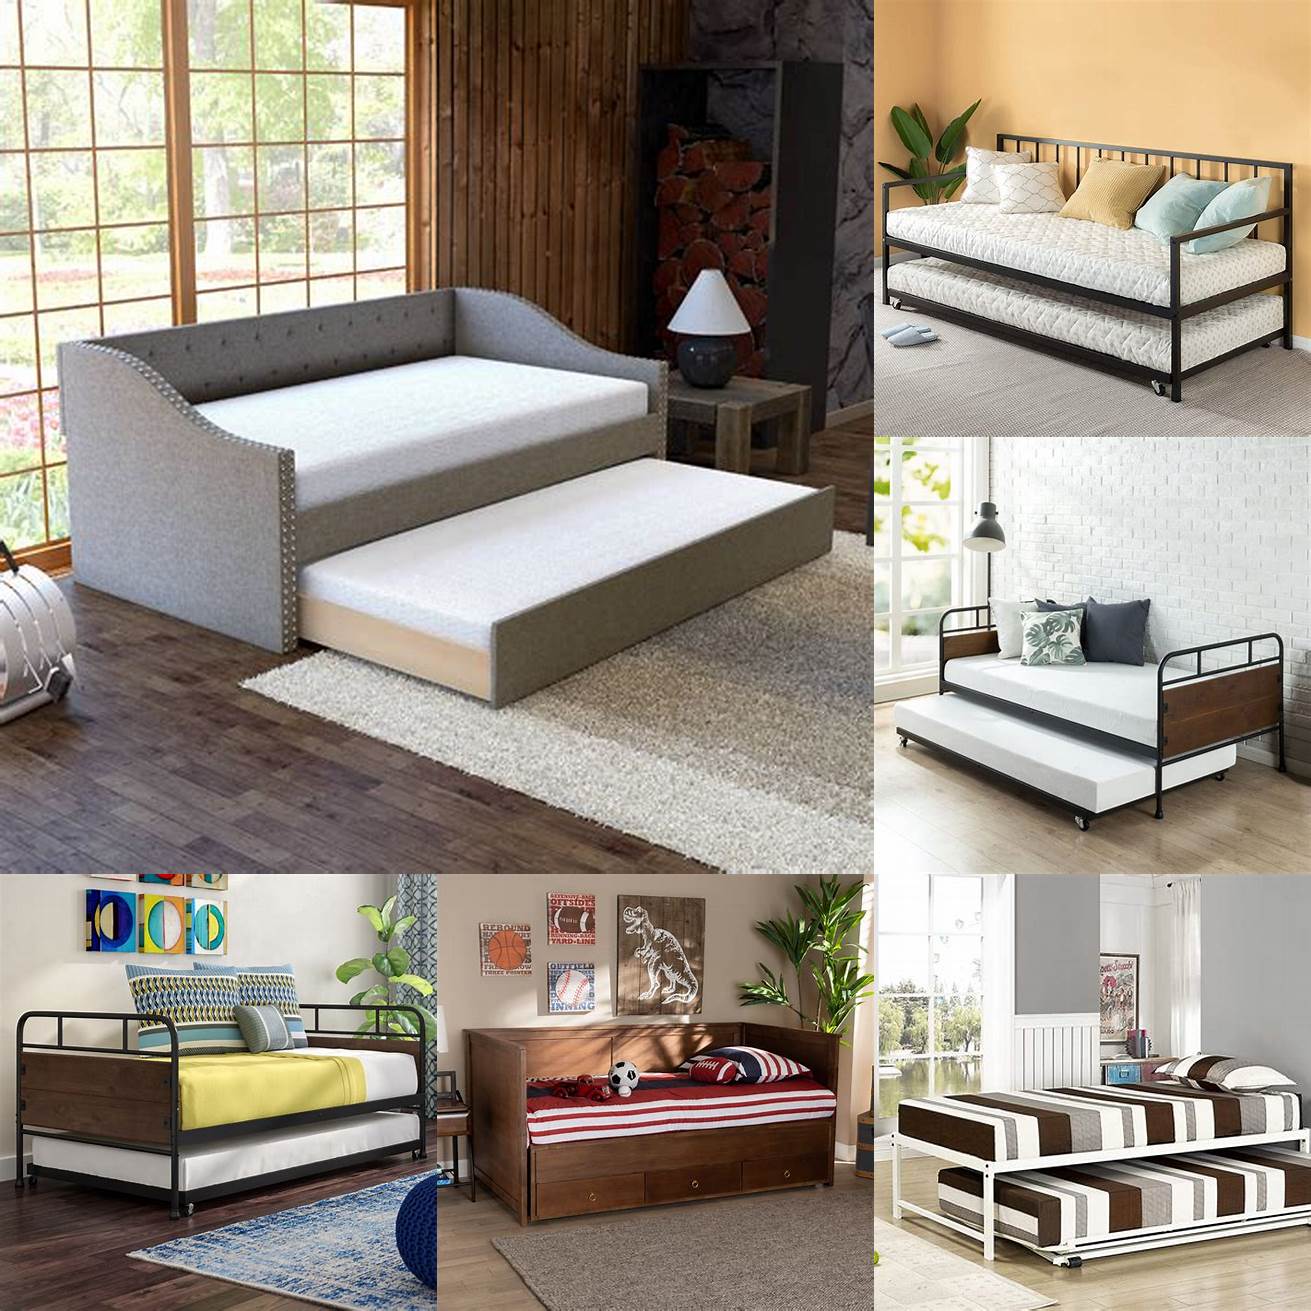 Material Twin beds with trundle come in various materials such as wood metal or upholstered fabric Choose a material that fits your style and budget